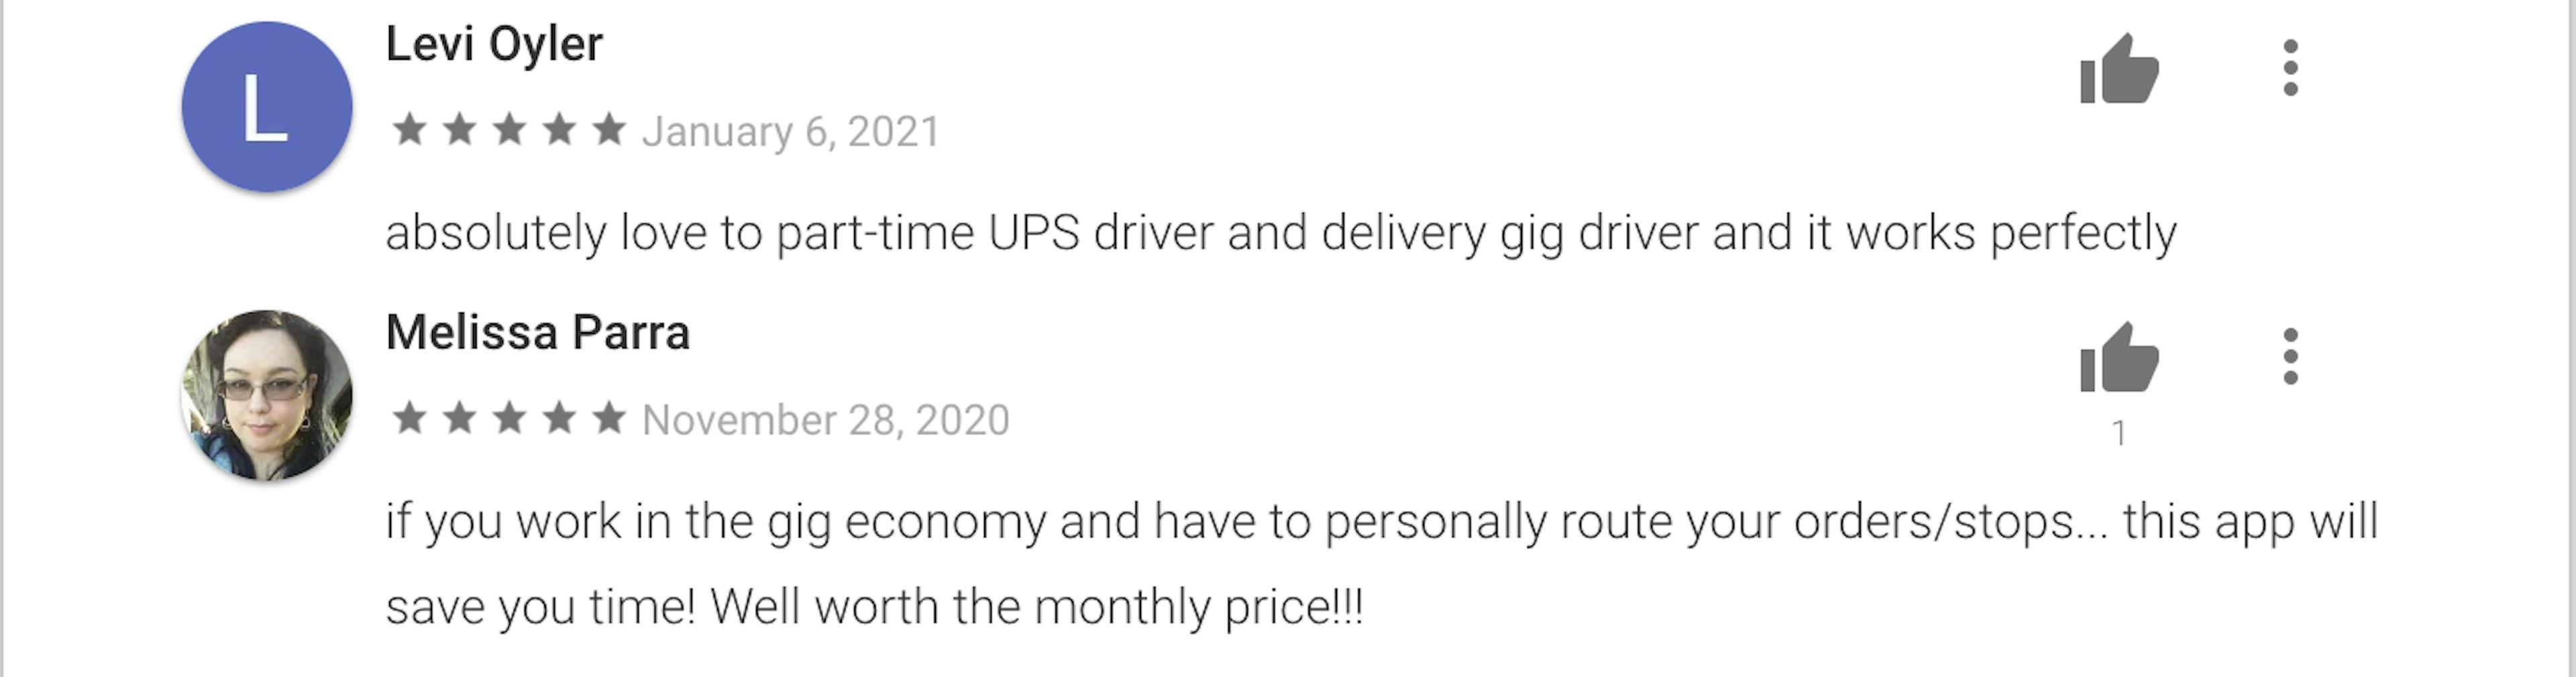 Delivery Drivers Review the Top-rated Mobile Route Planning Apps: Circuit Route Planner reviews